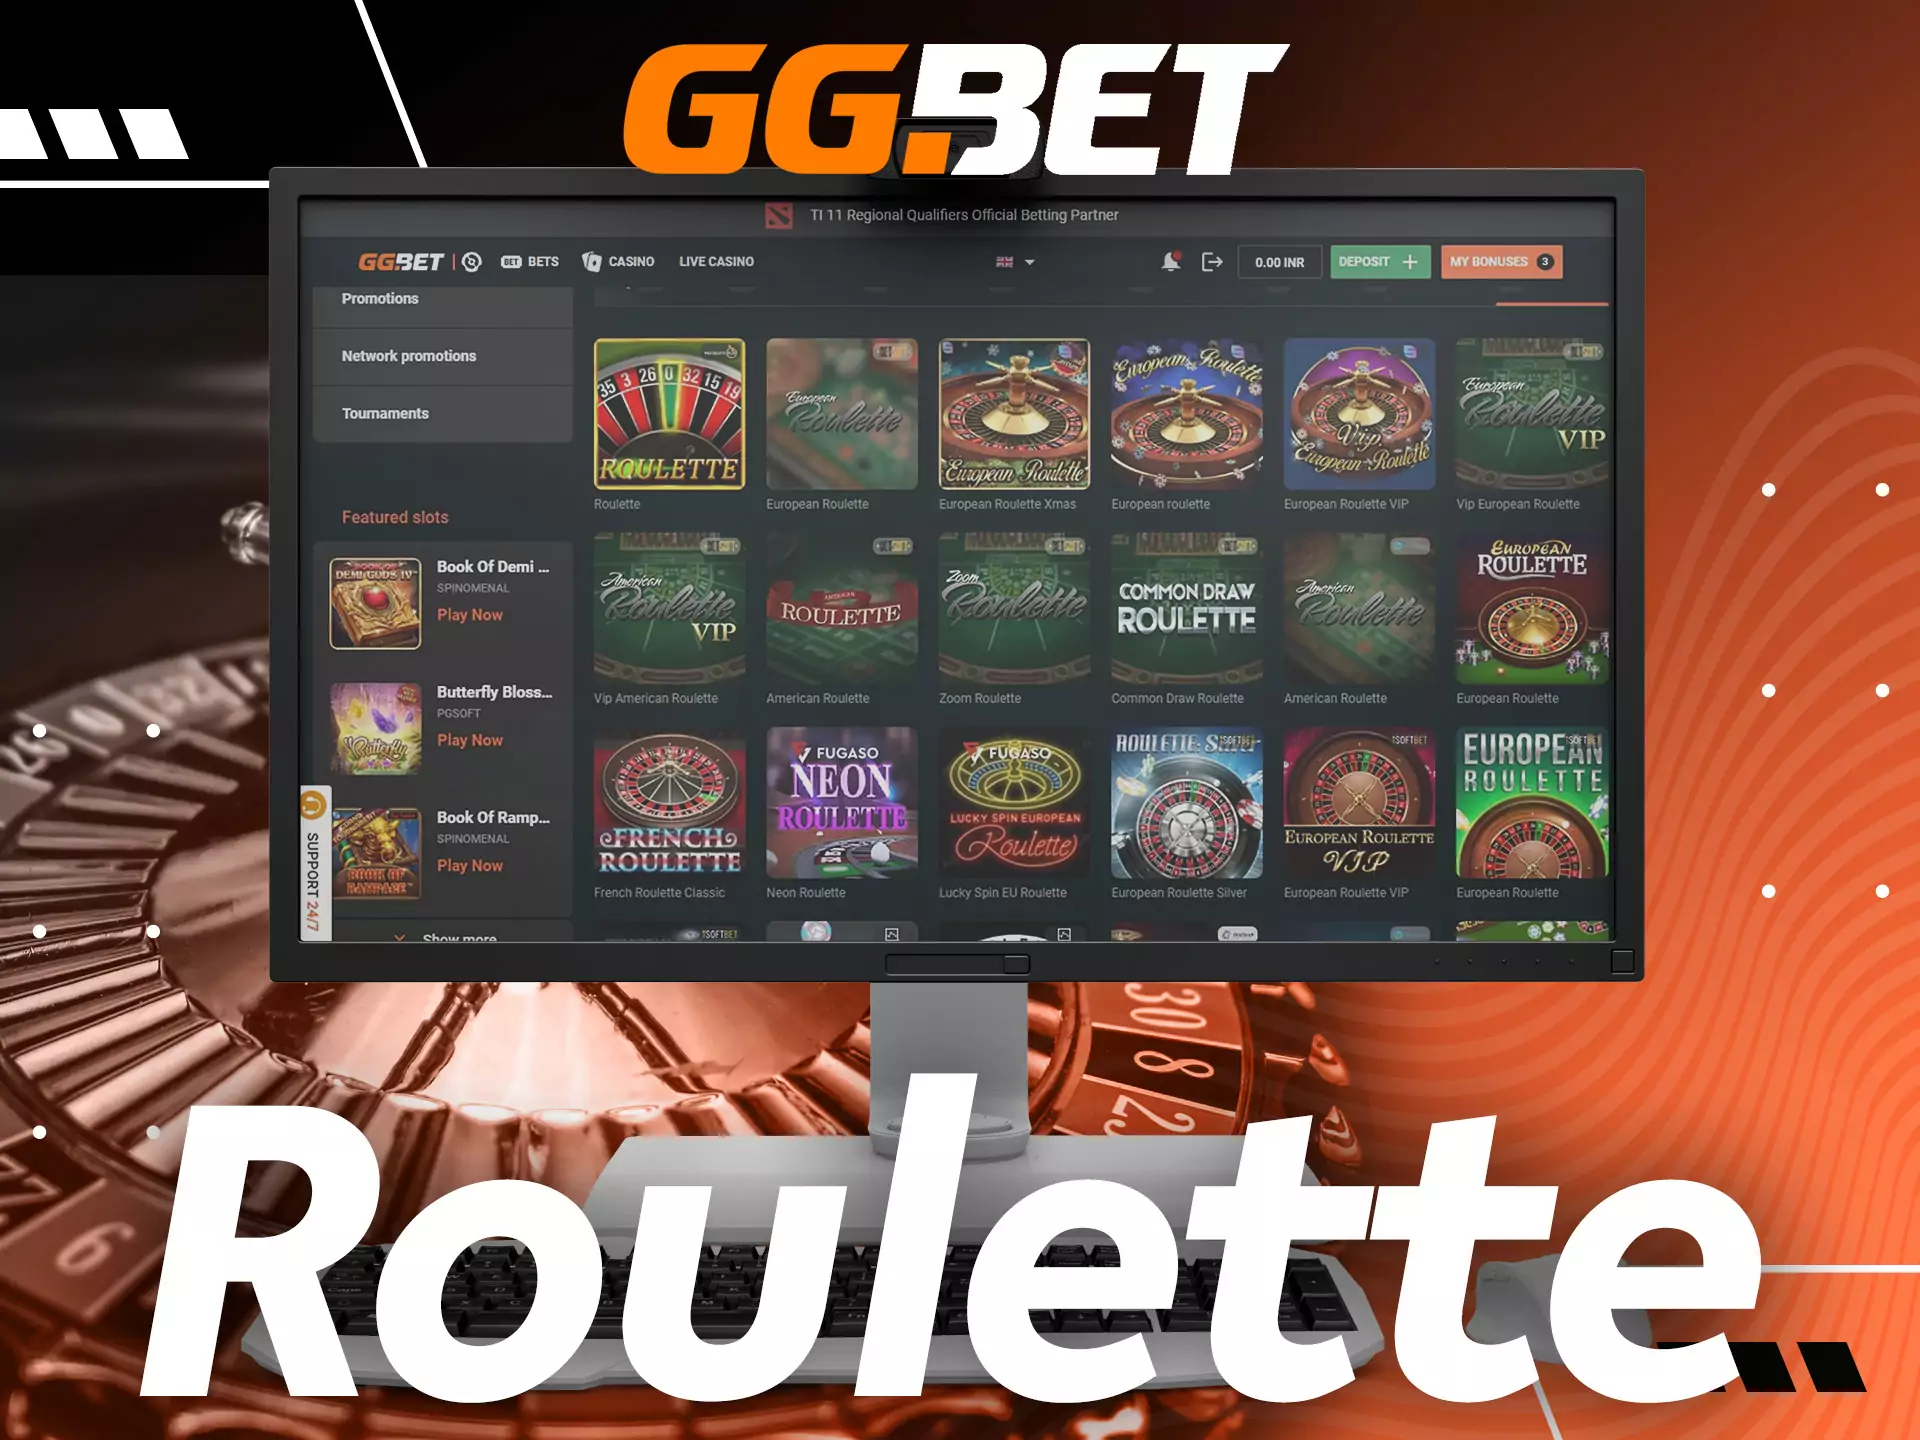 On GGBet, you find a wide range of roulette games.